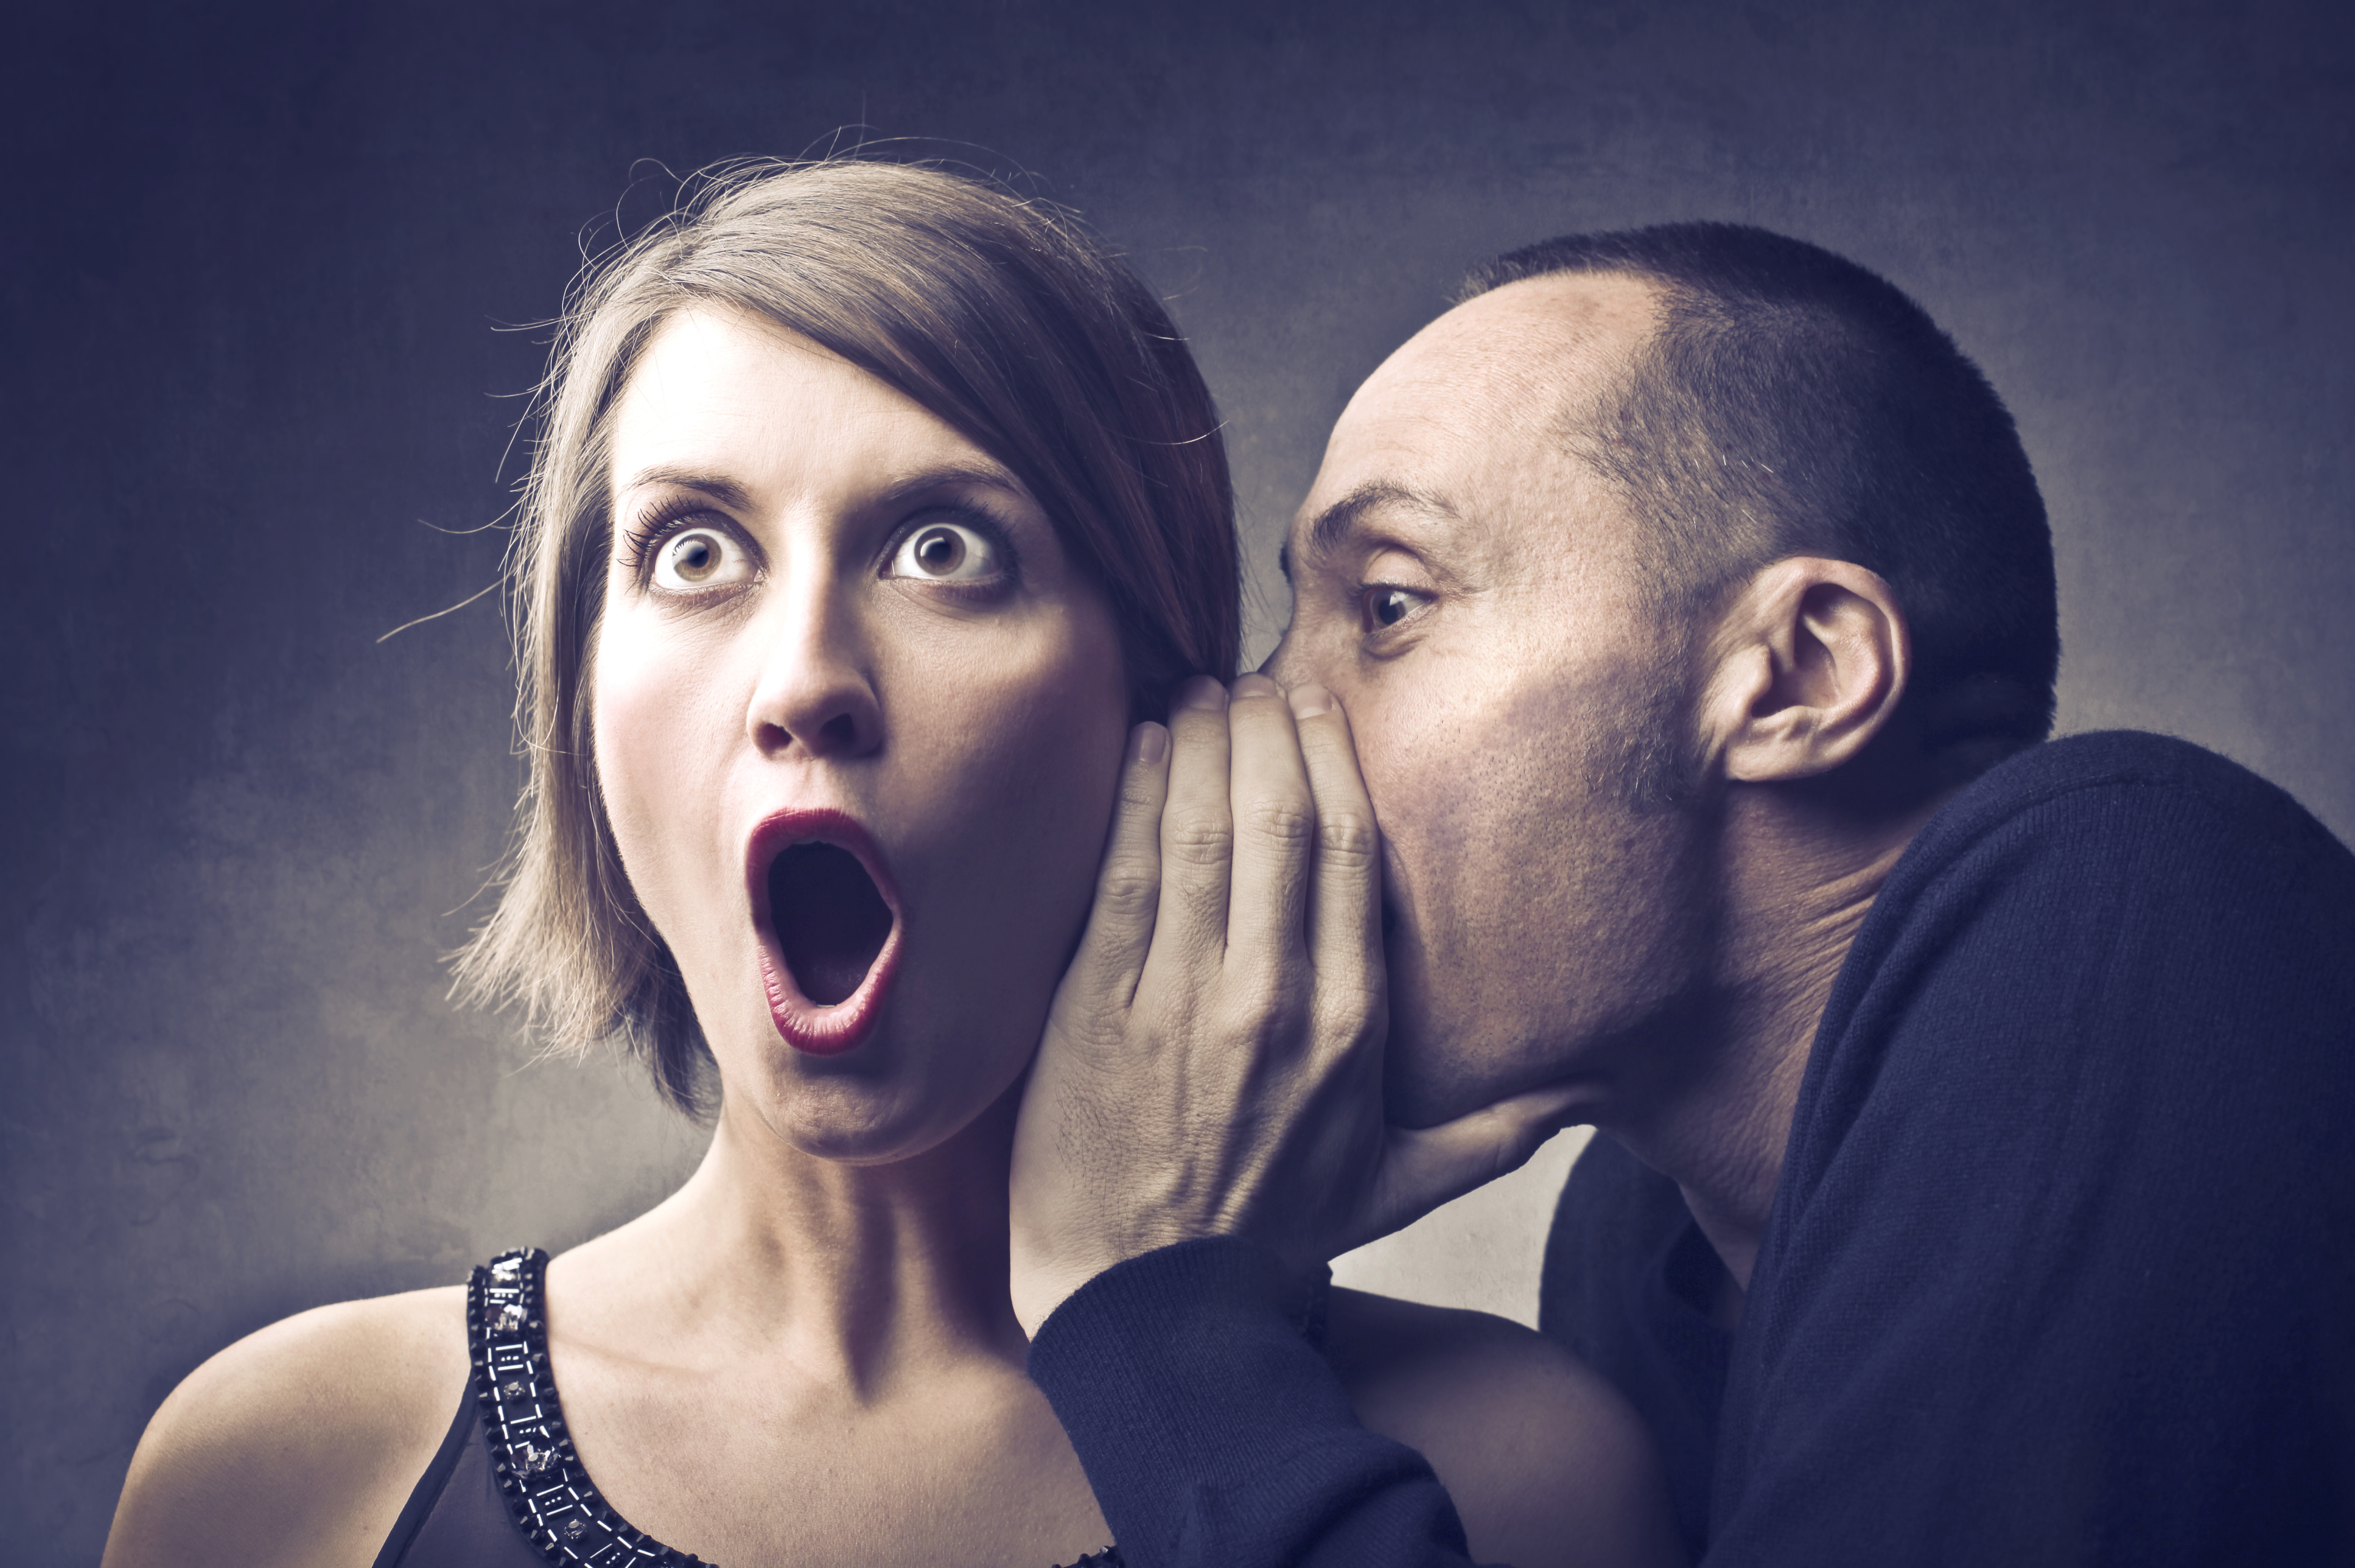 8 Types of gossip and what the Bible says about gossiping